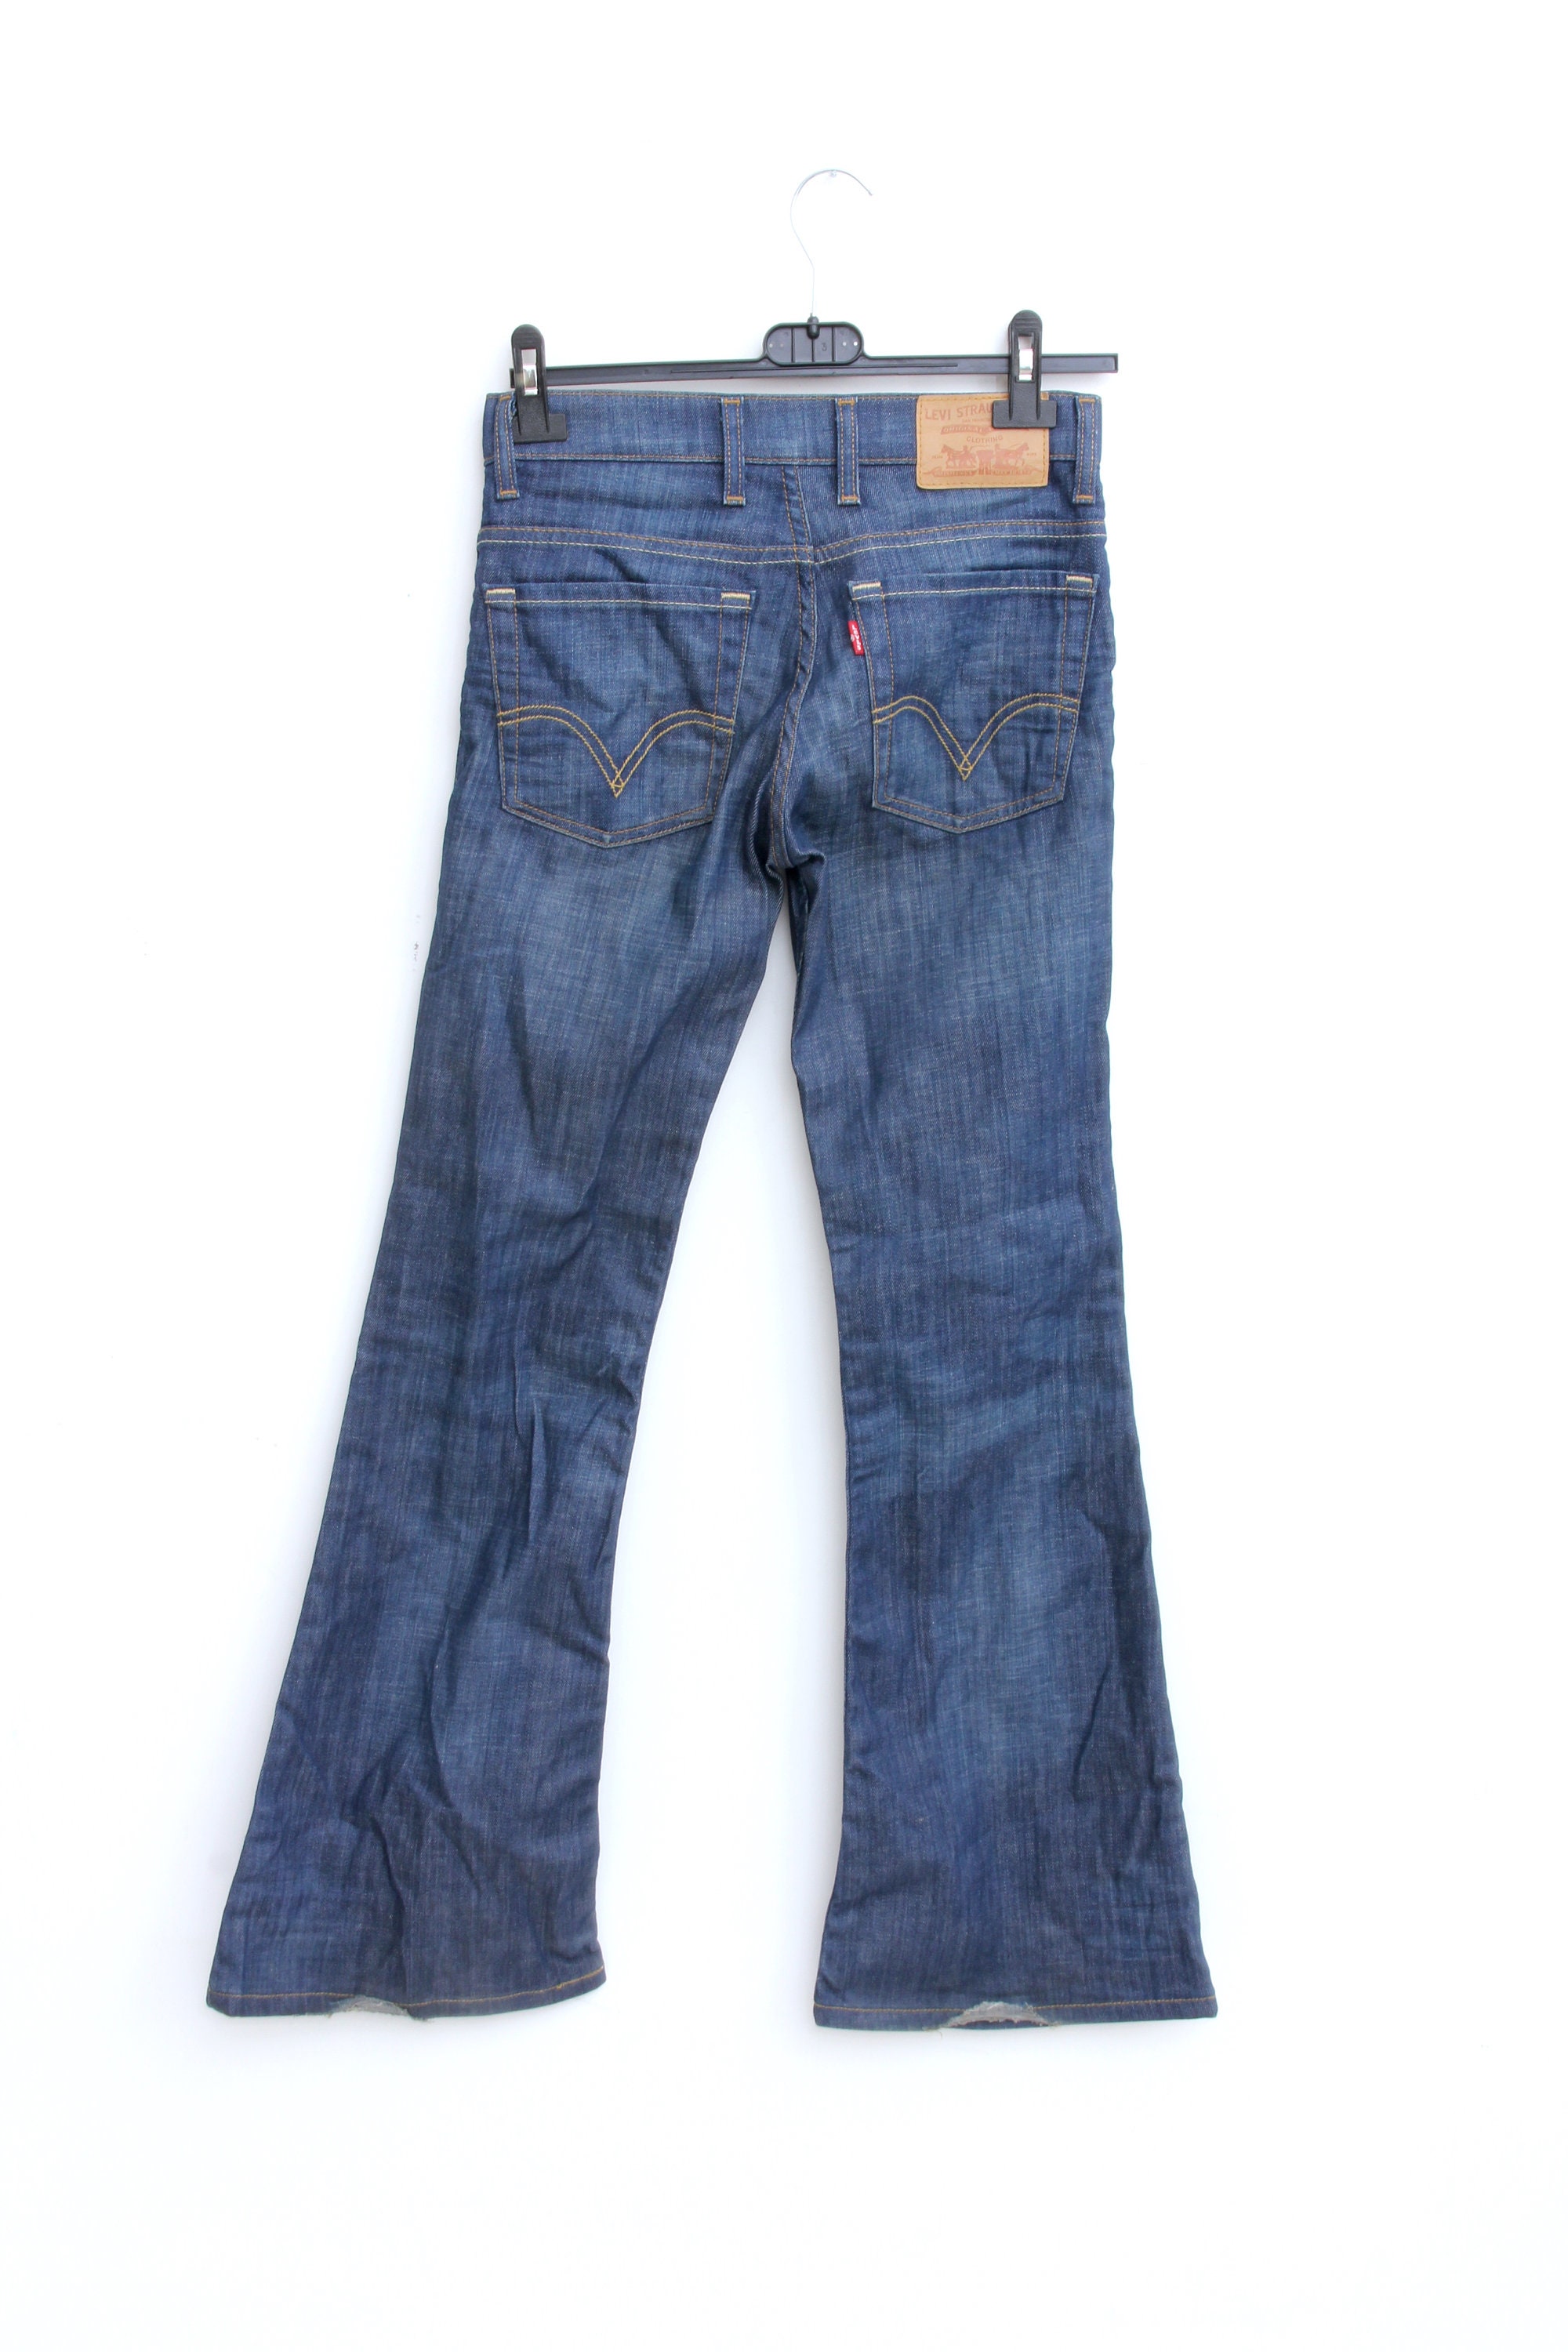 levi's cowgirl jeans